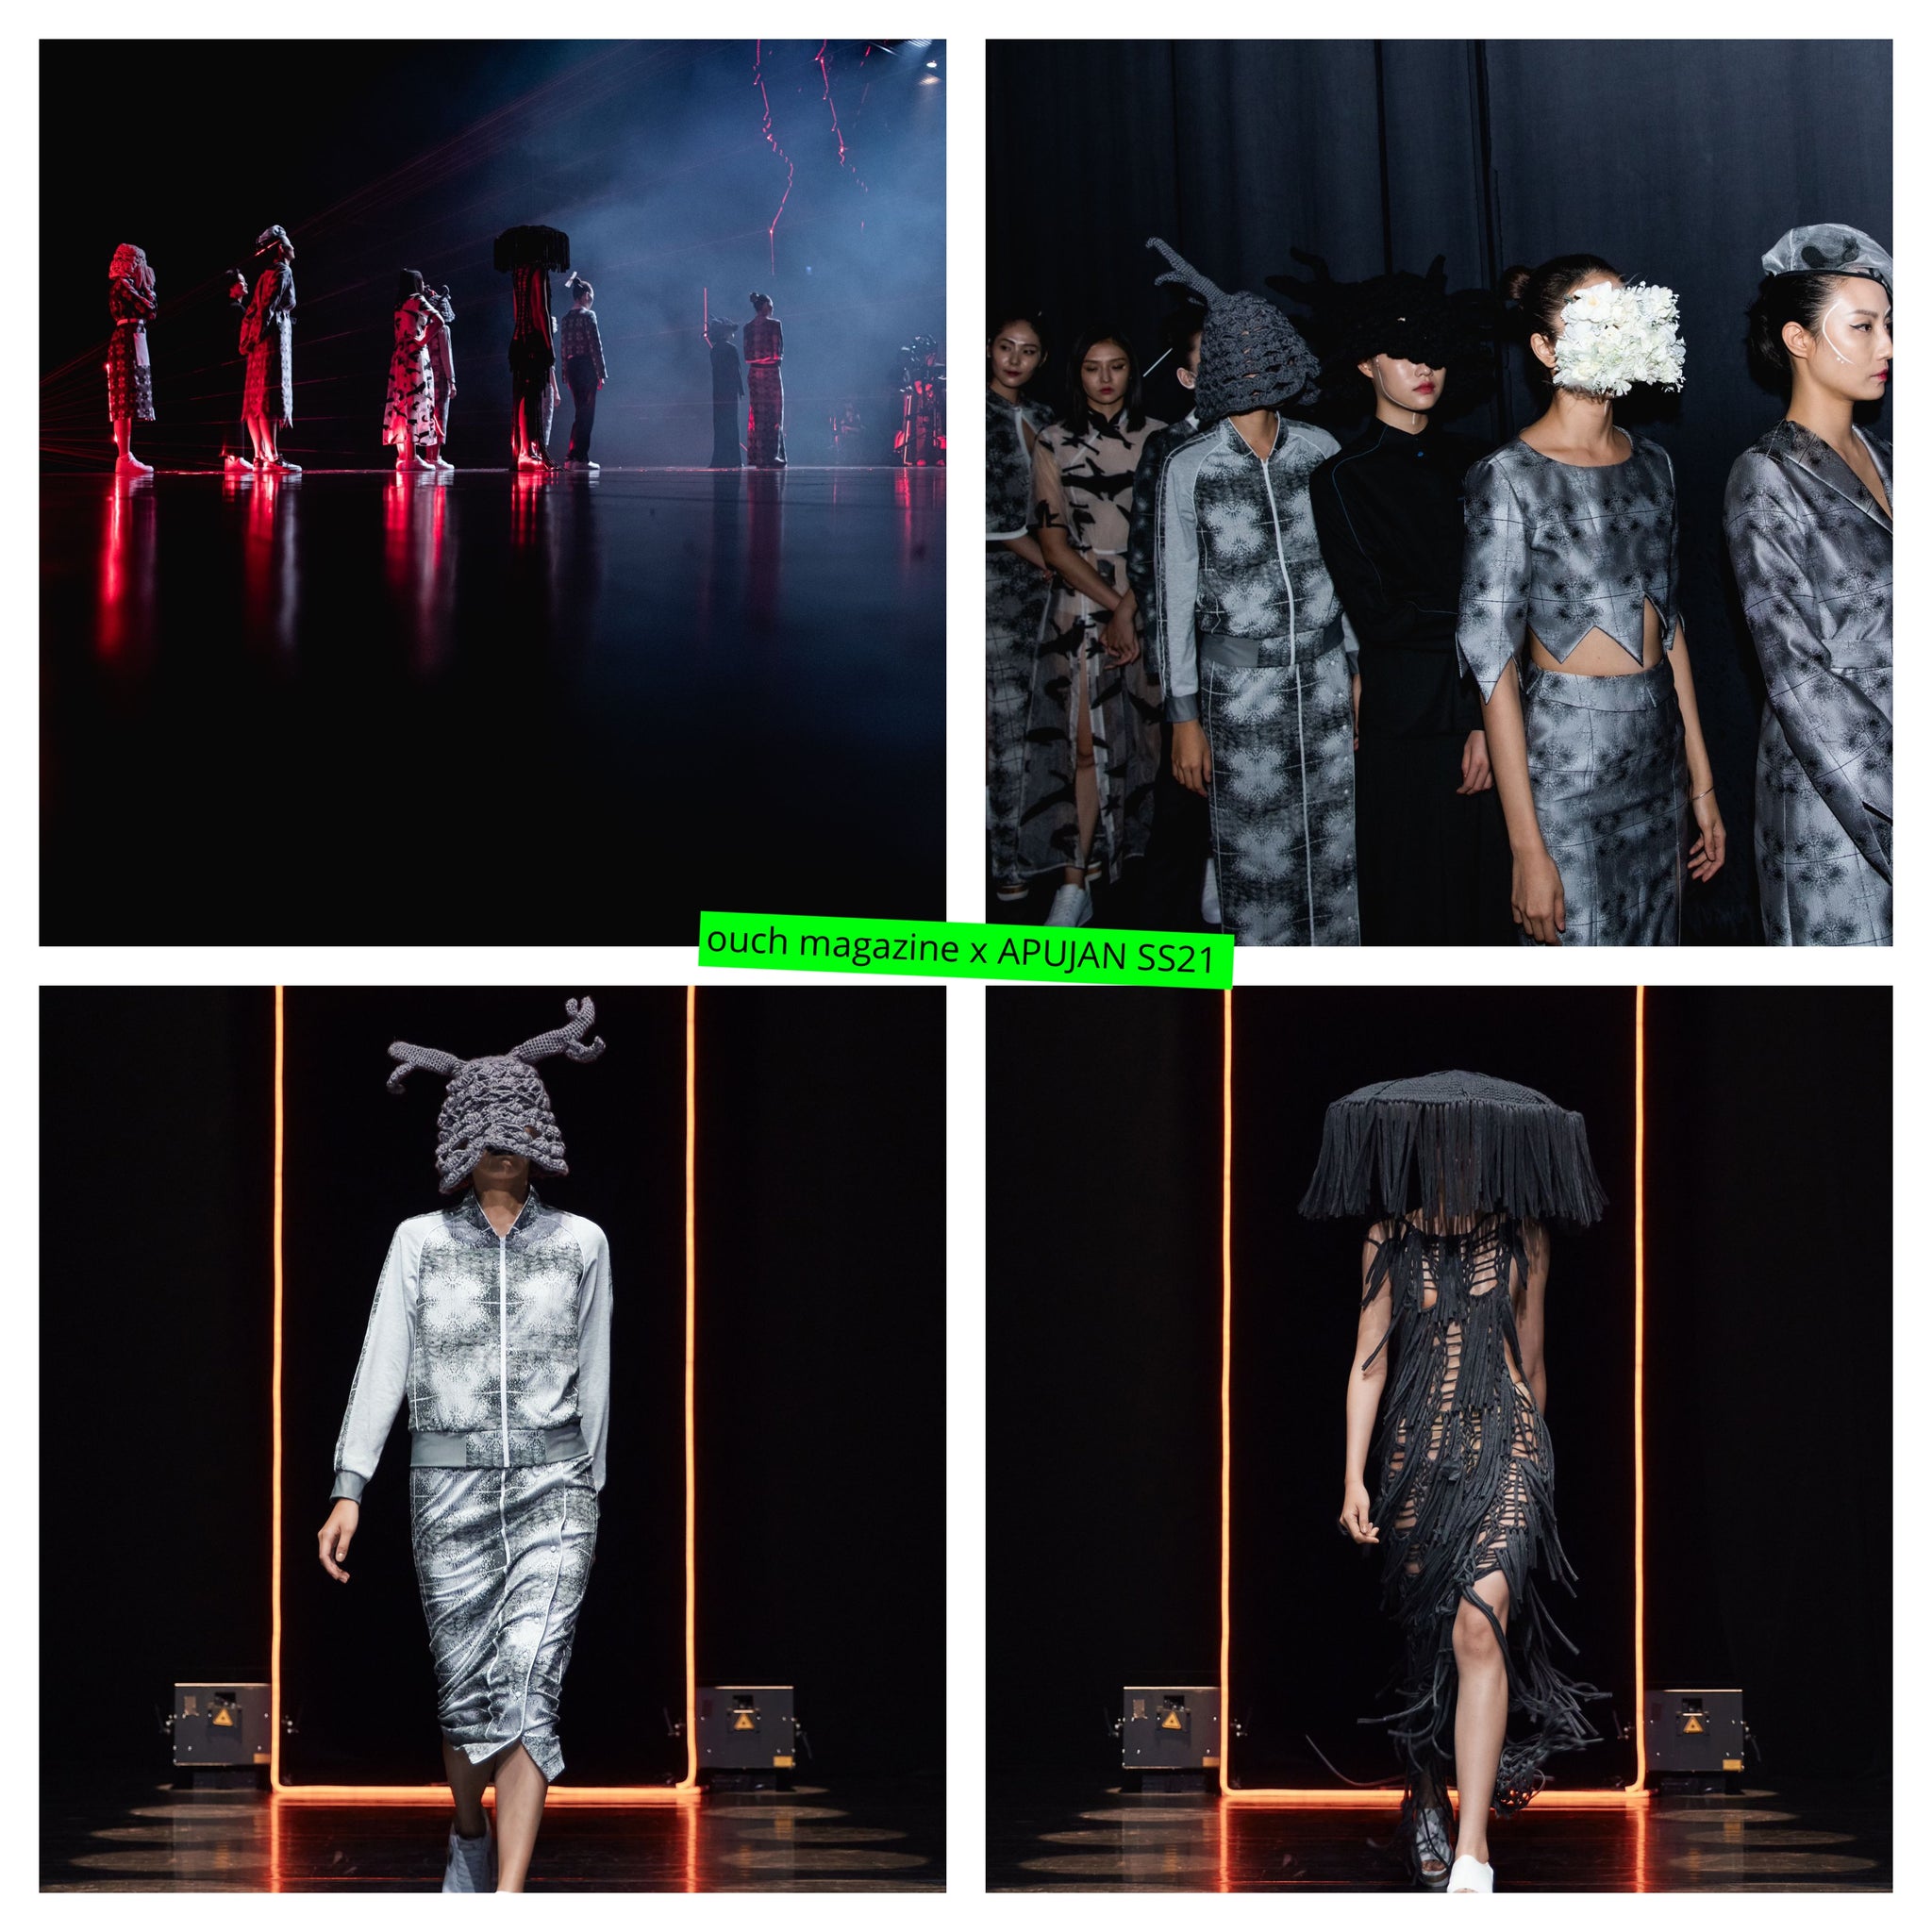 APUJAN’s virtual LFW show in collaboration with Fashion Scout and the British Fashion Council 